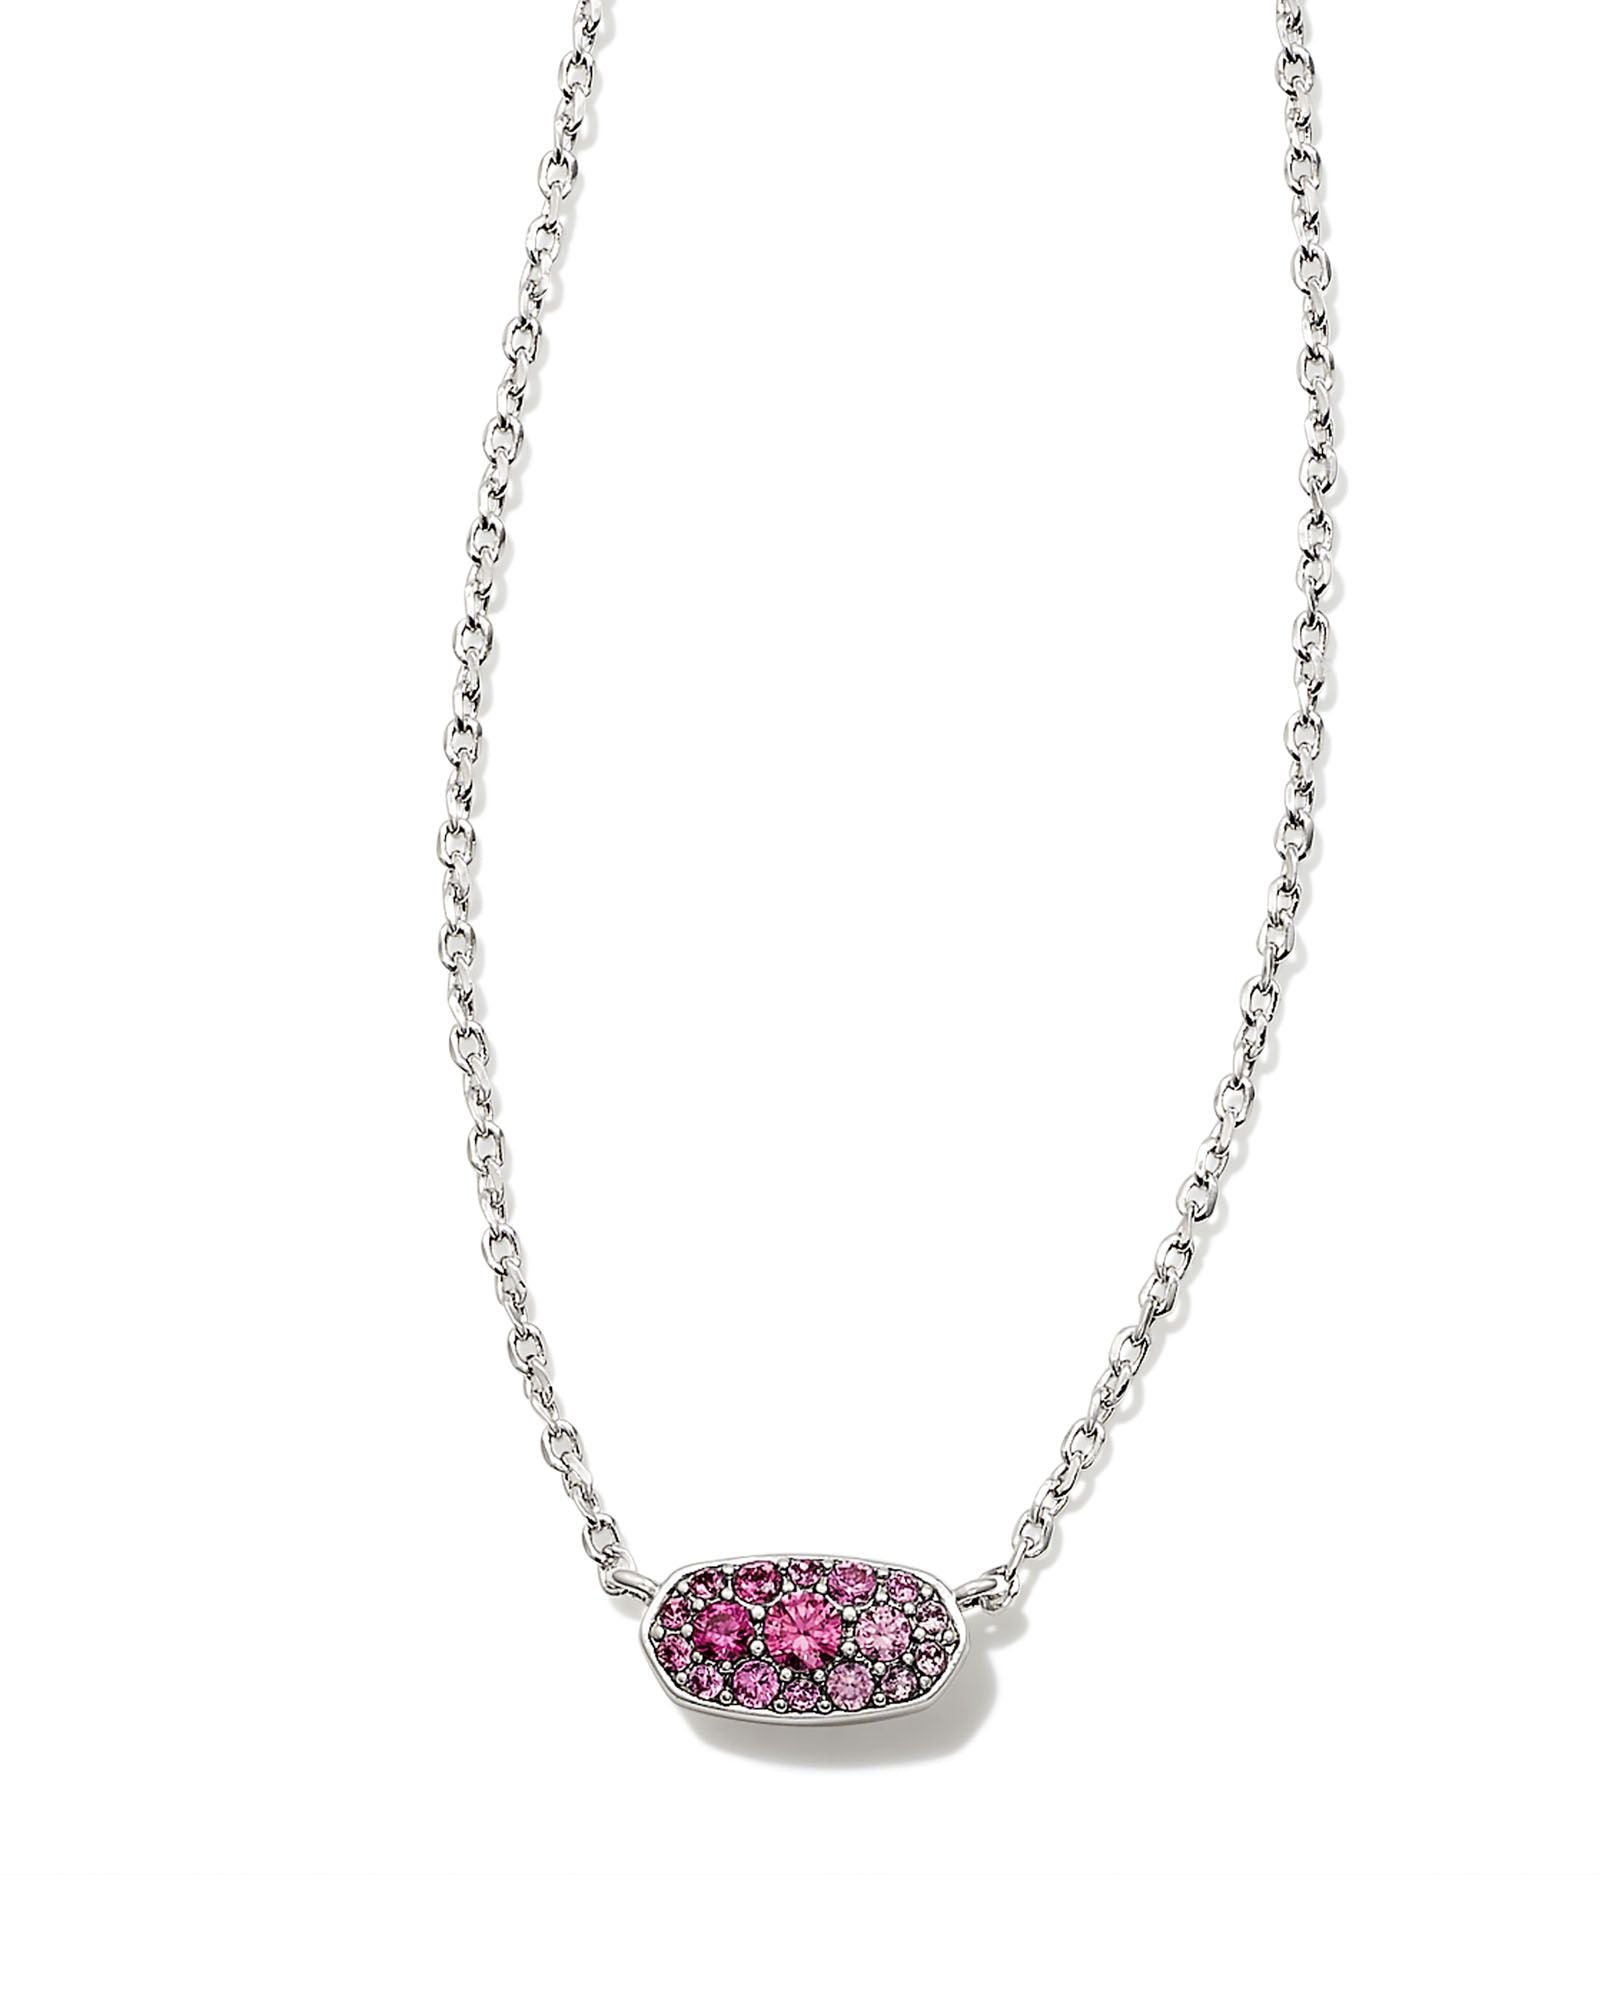 Grayson Crystal Pendant Necklace Silver Pink Ombre